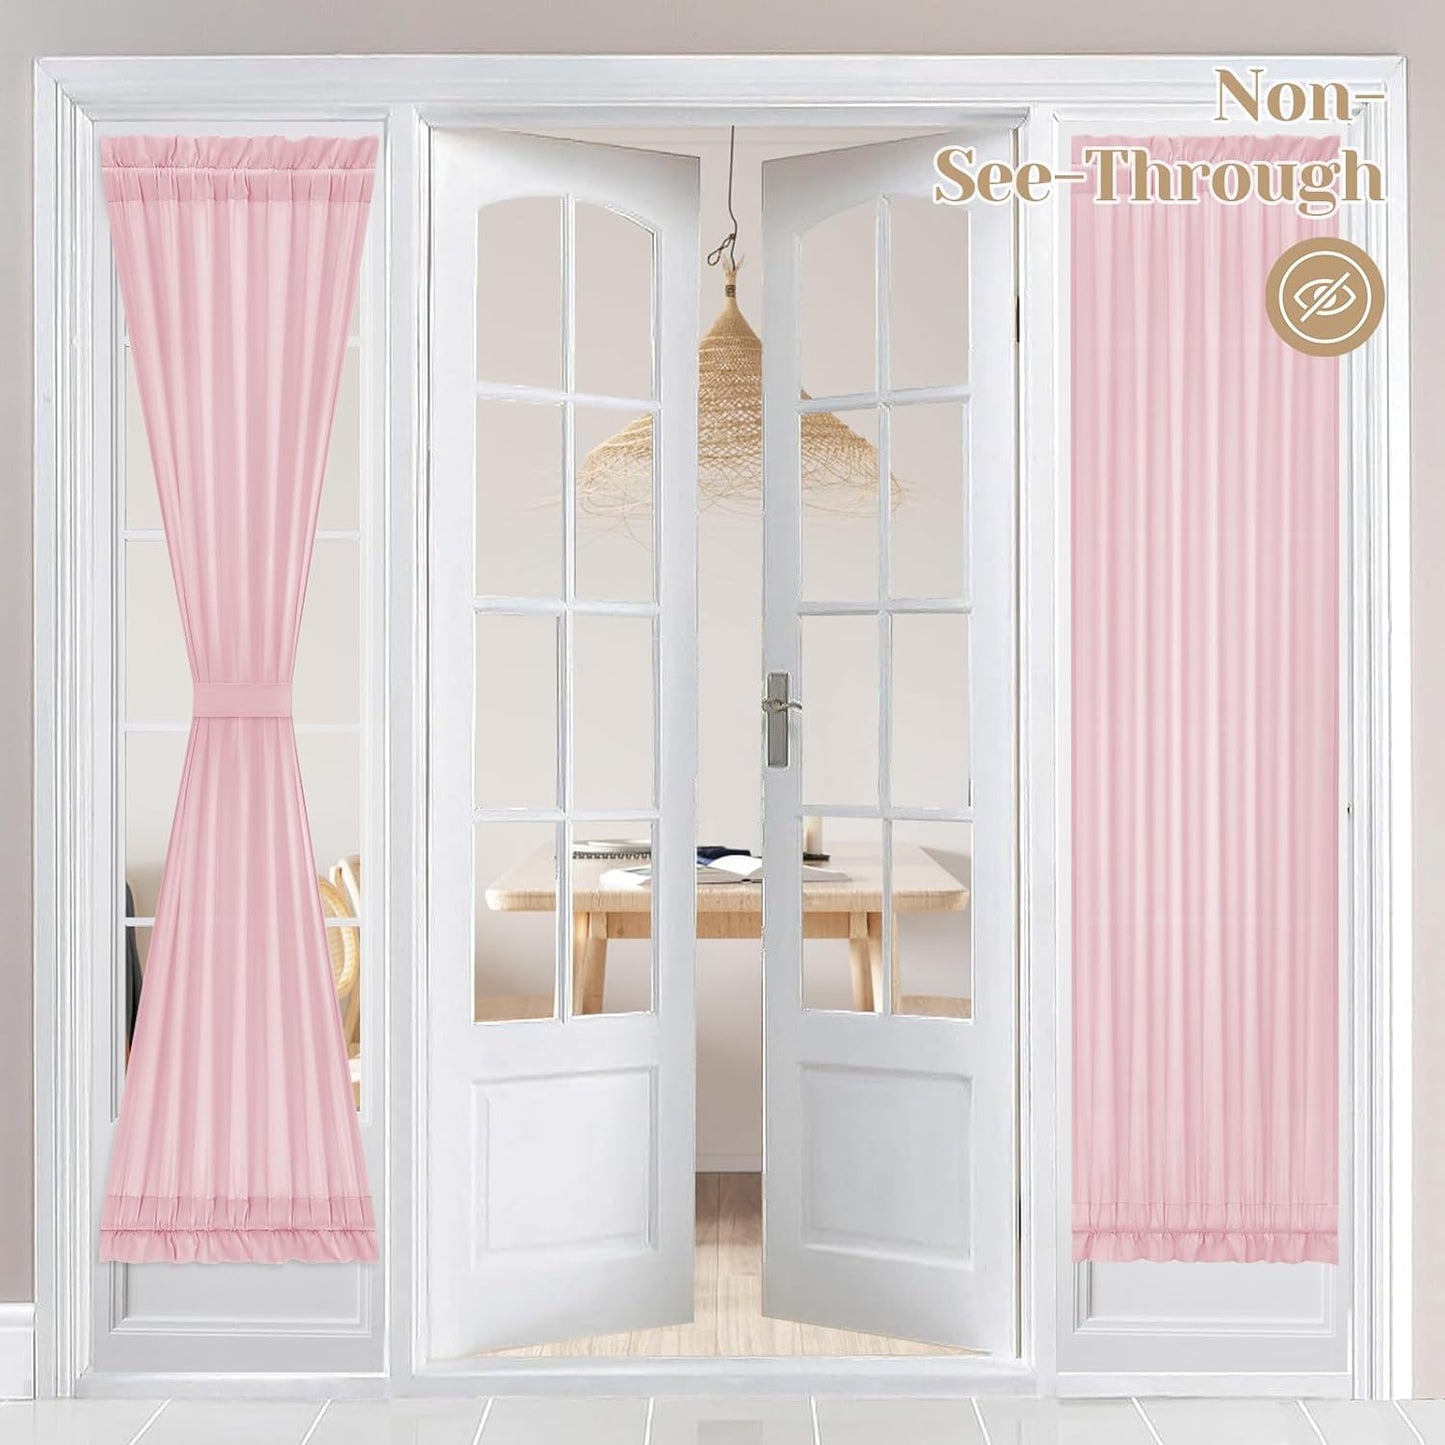 HOMEIDEAS Non-See-Through Sidelight Curtains for Front Door, Privacy Semi Sheer Door Window Curtains, Rod Pocket Light Filtering French Door Curtains with Tieback, (1 Panel, White, 26W X 72L)  HOMEIDEAS Light Pink 2 Panels-26 X 72 